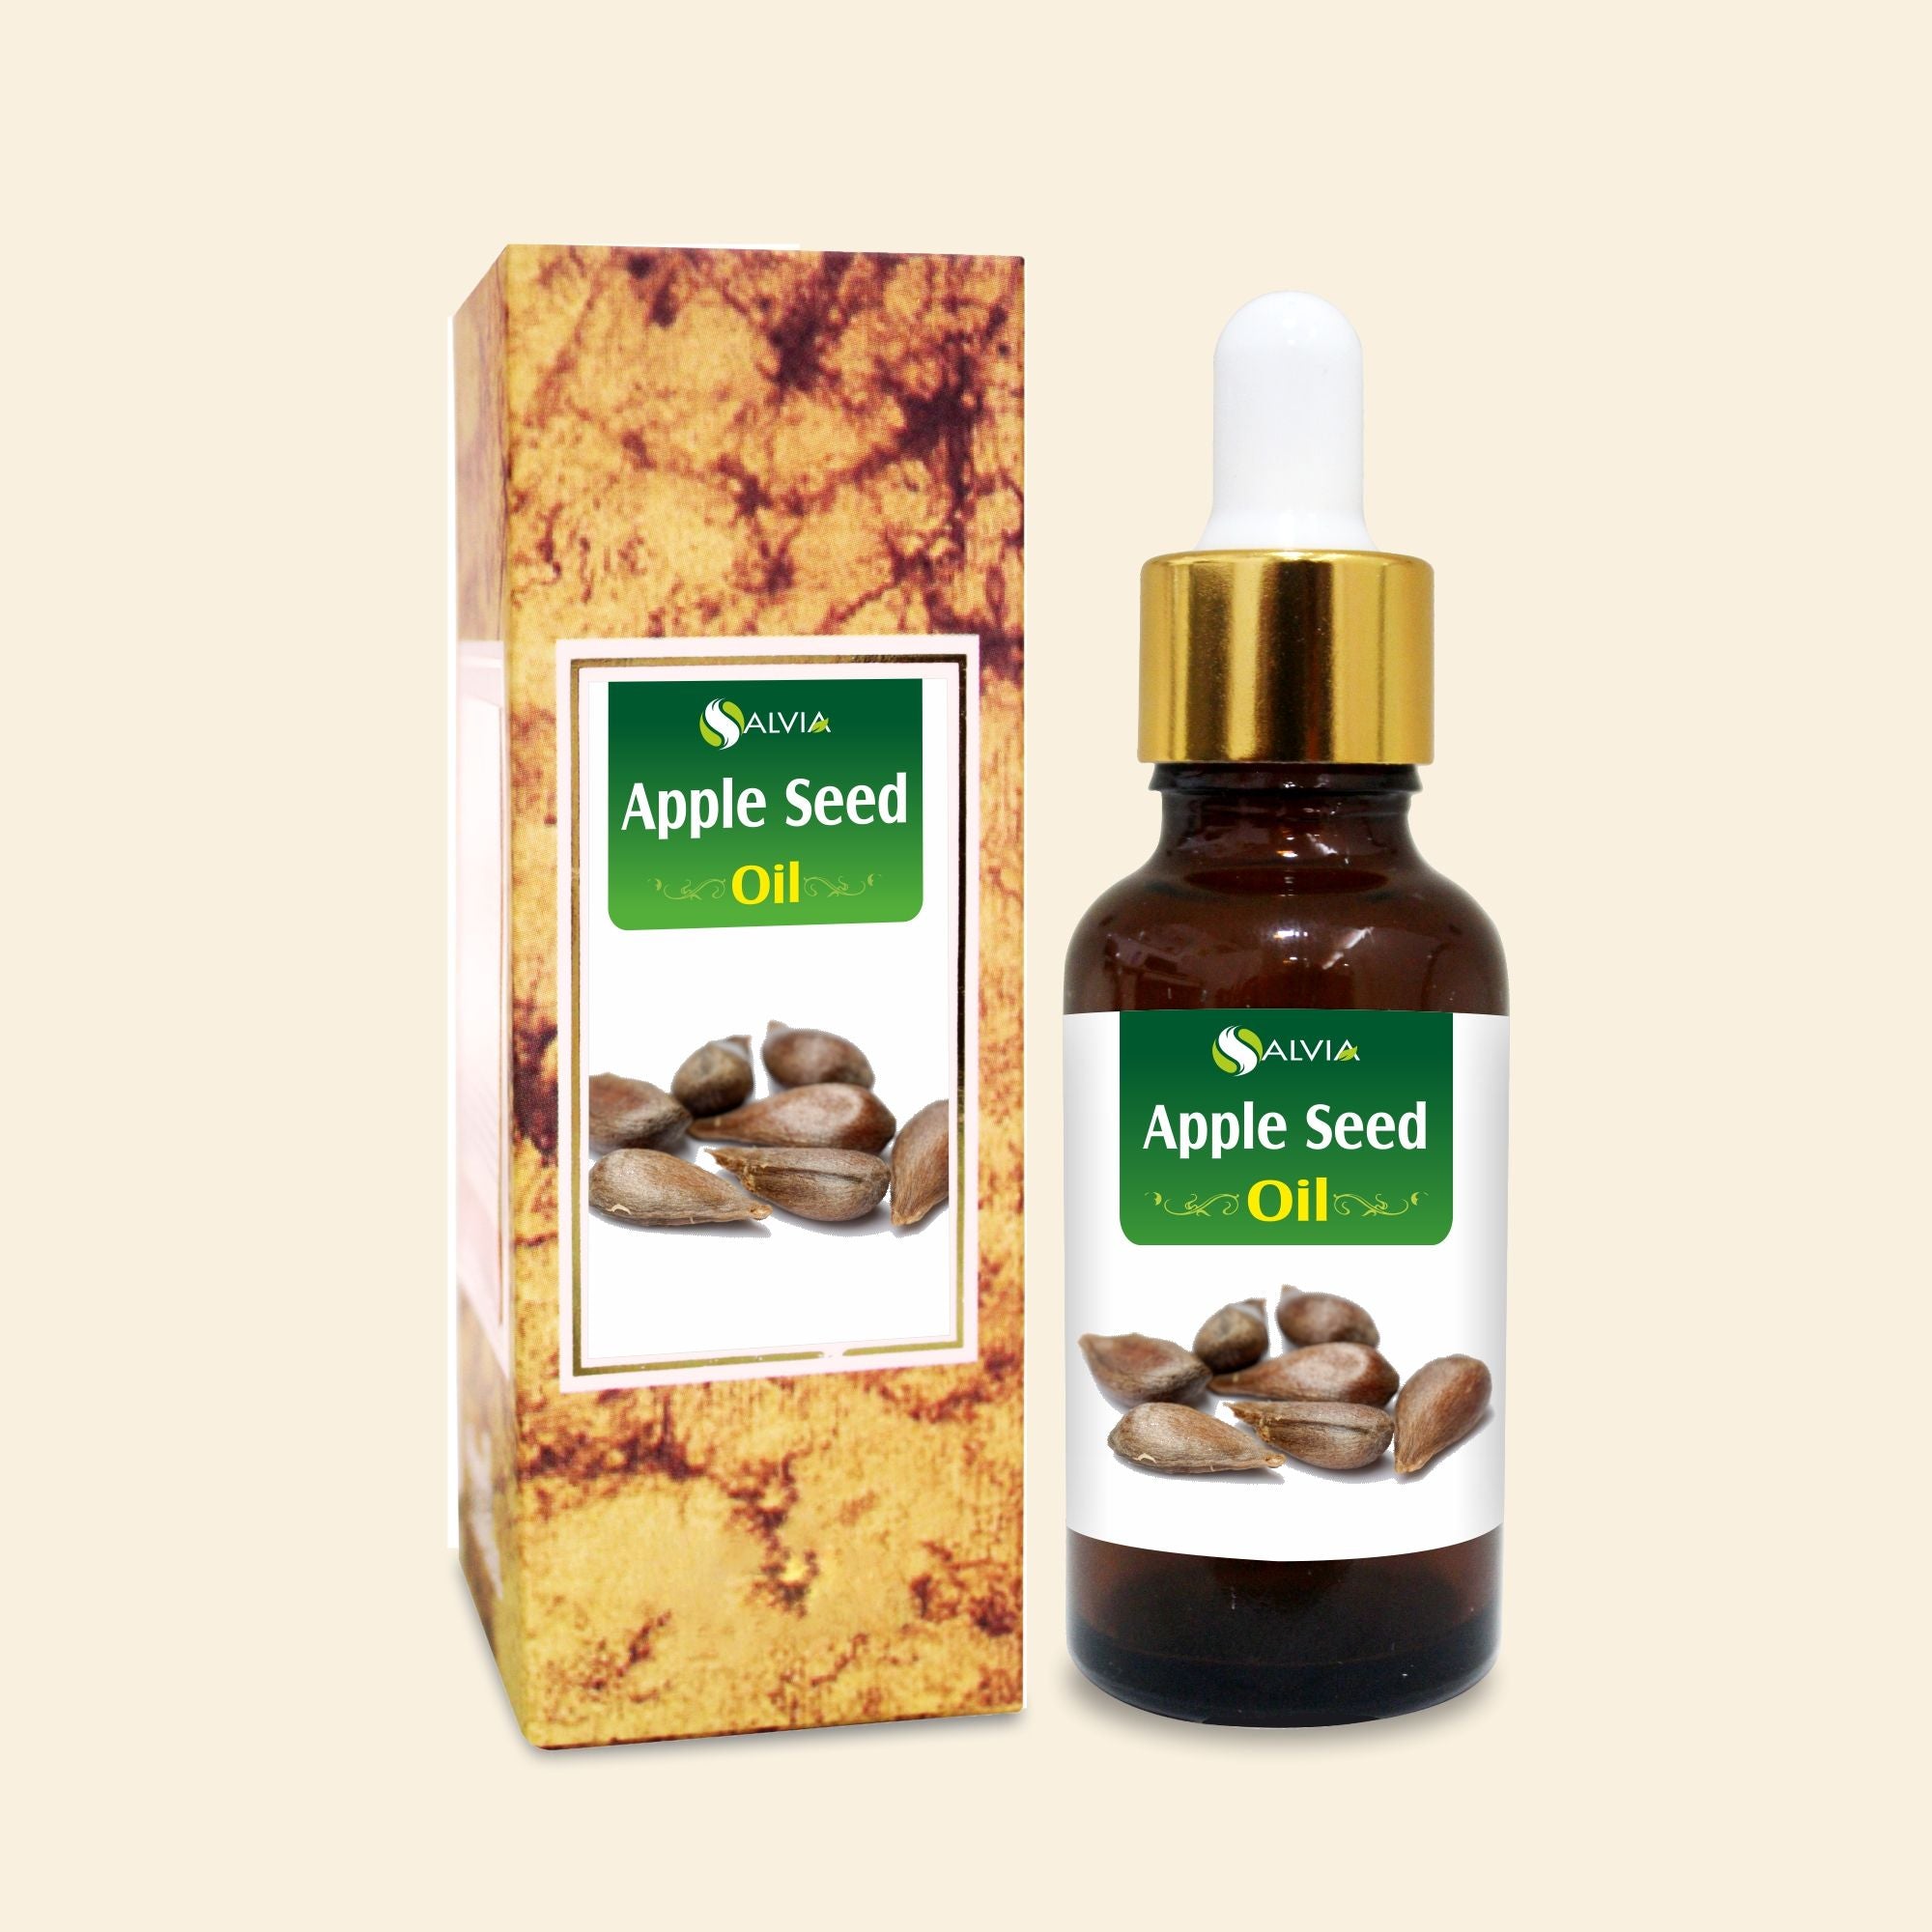 Salvia Natural Carrier Oils Apple Seed Oil (Pyrus-Malus) 100% Natural Pure Carrier Oil